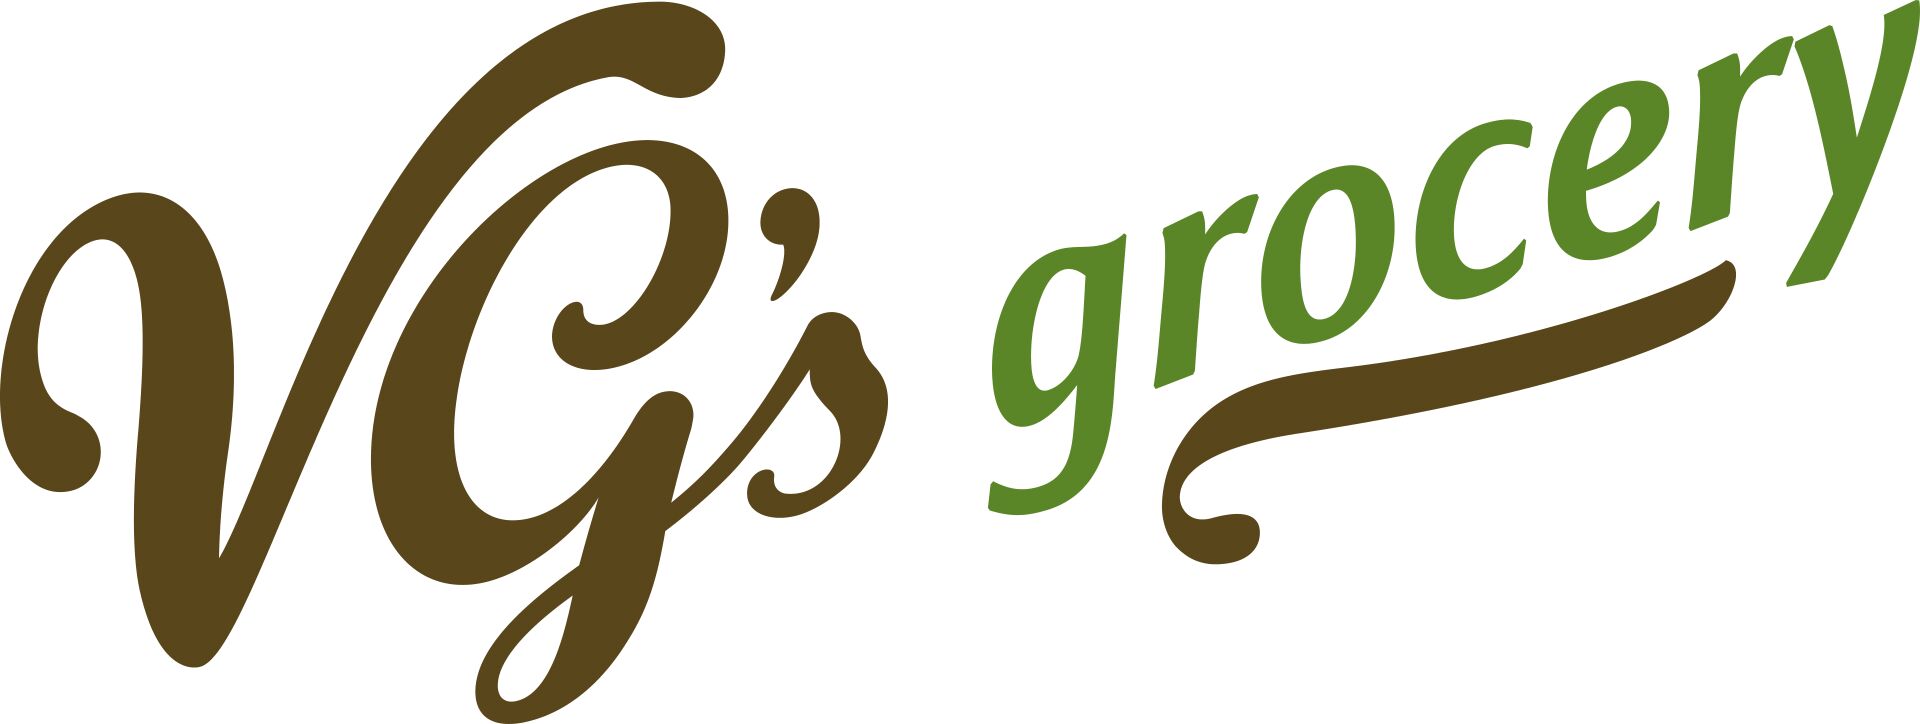 VGs Grocery | Logo